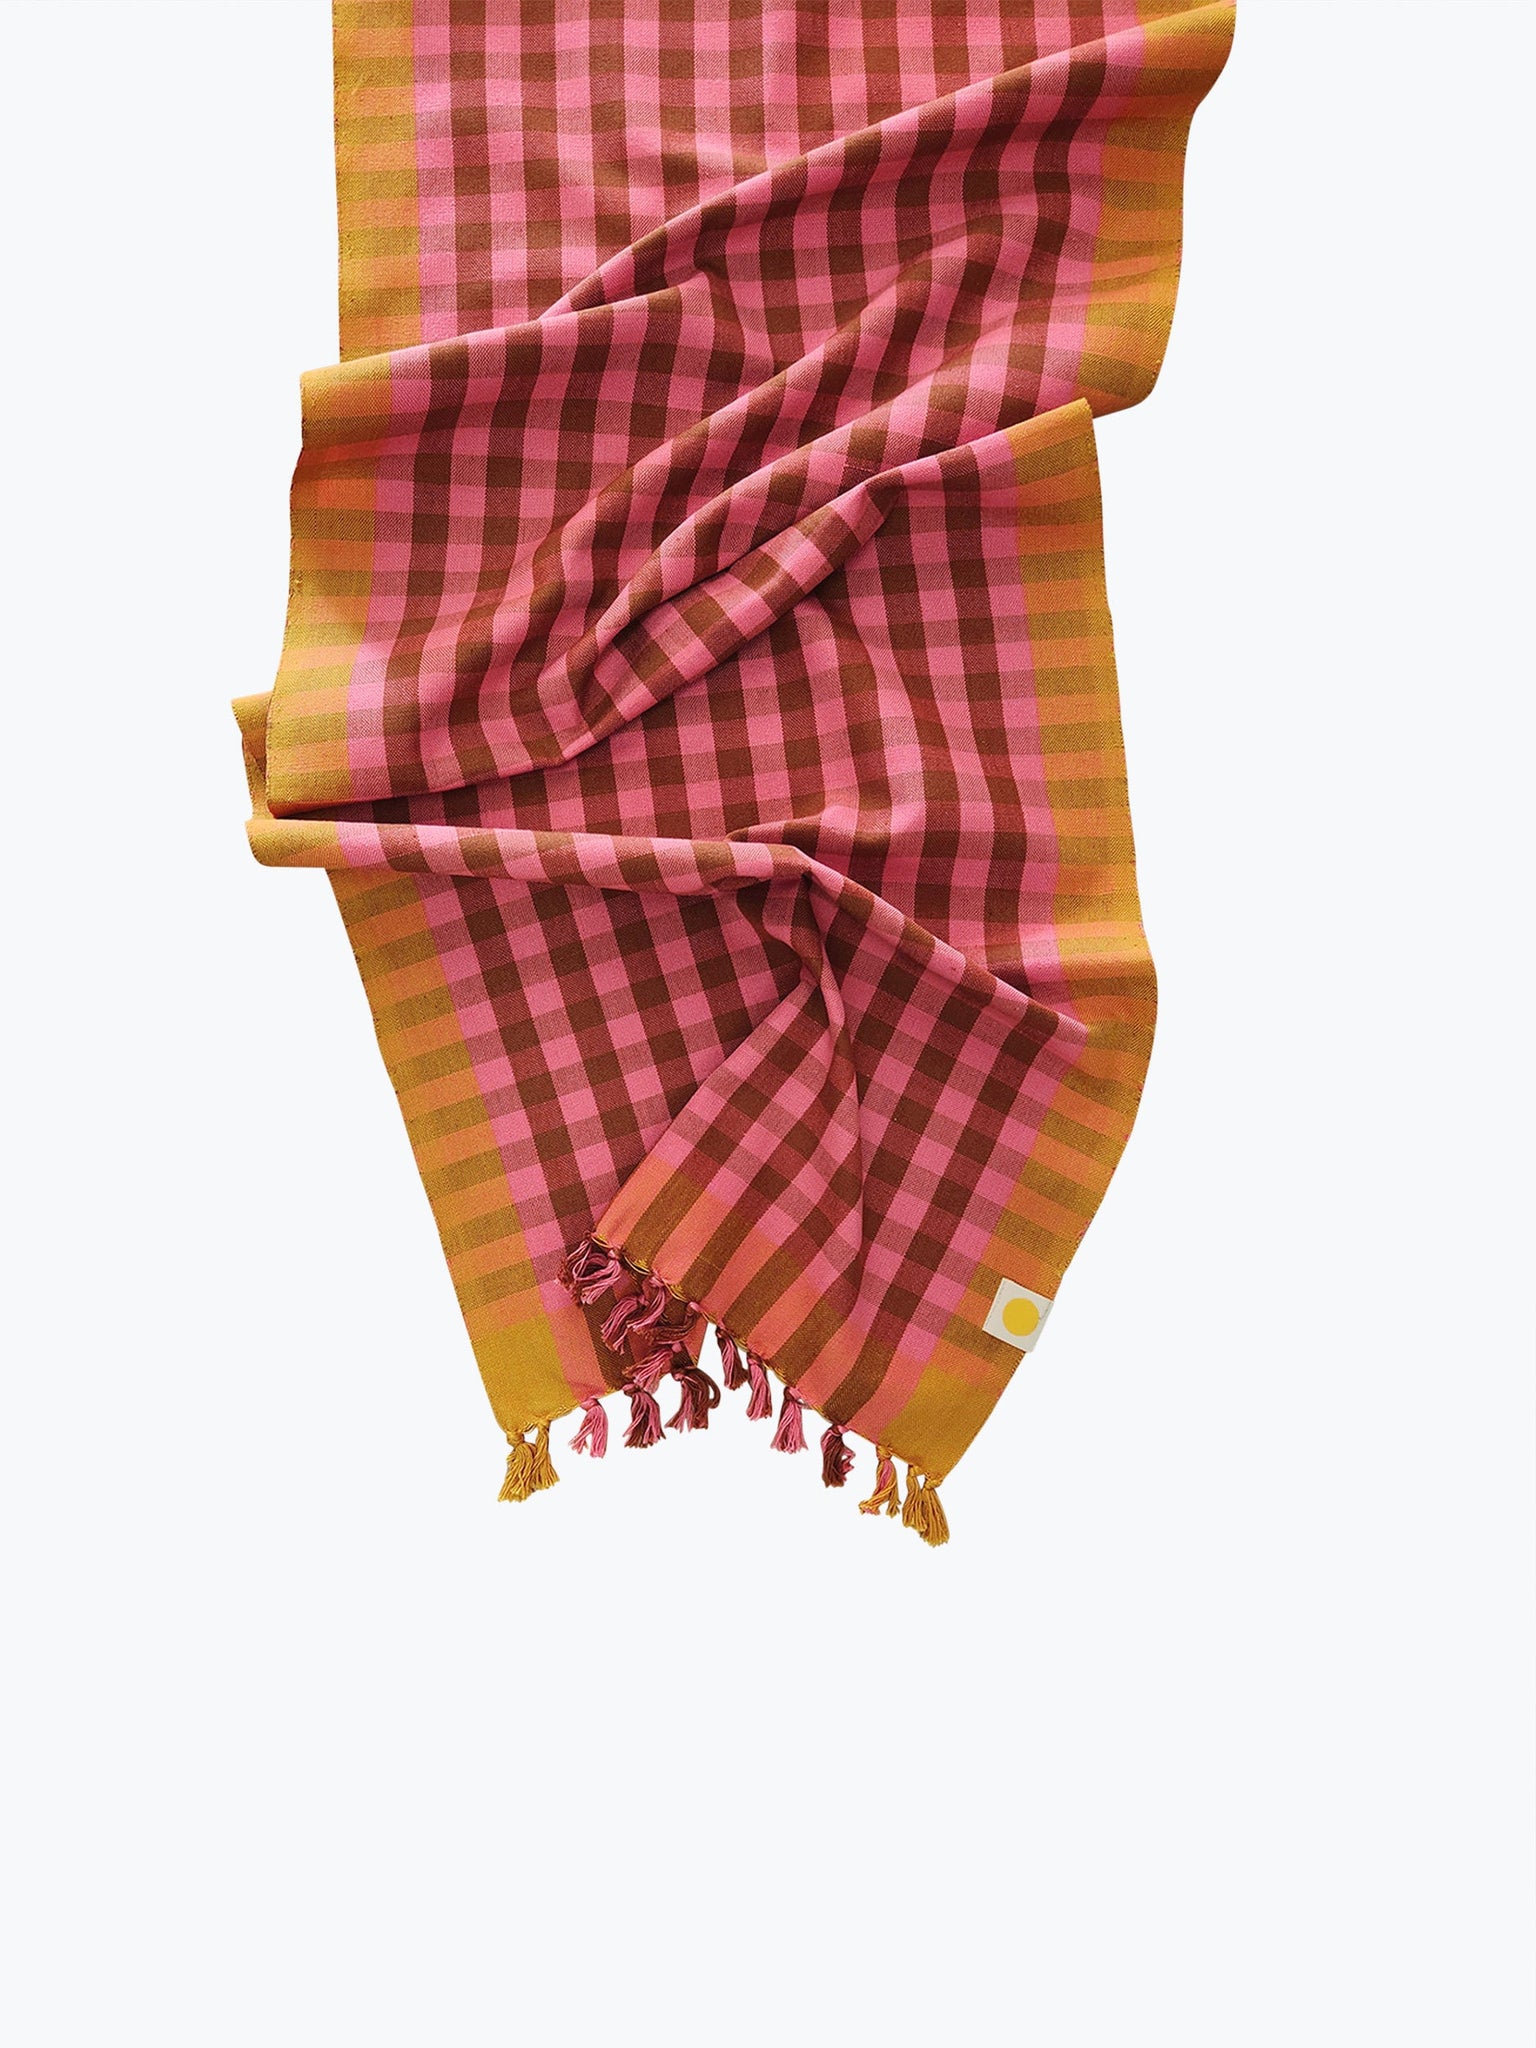 Grid Plaid Table Runner // Grapefruit // Not Available for In-Store Pick Up